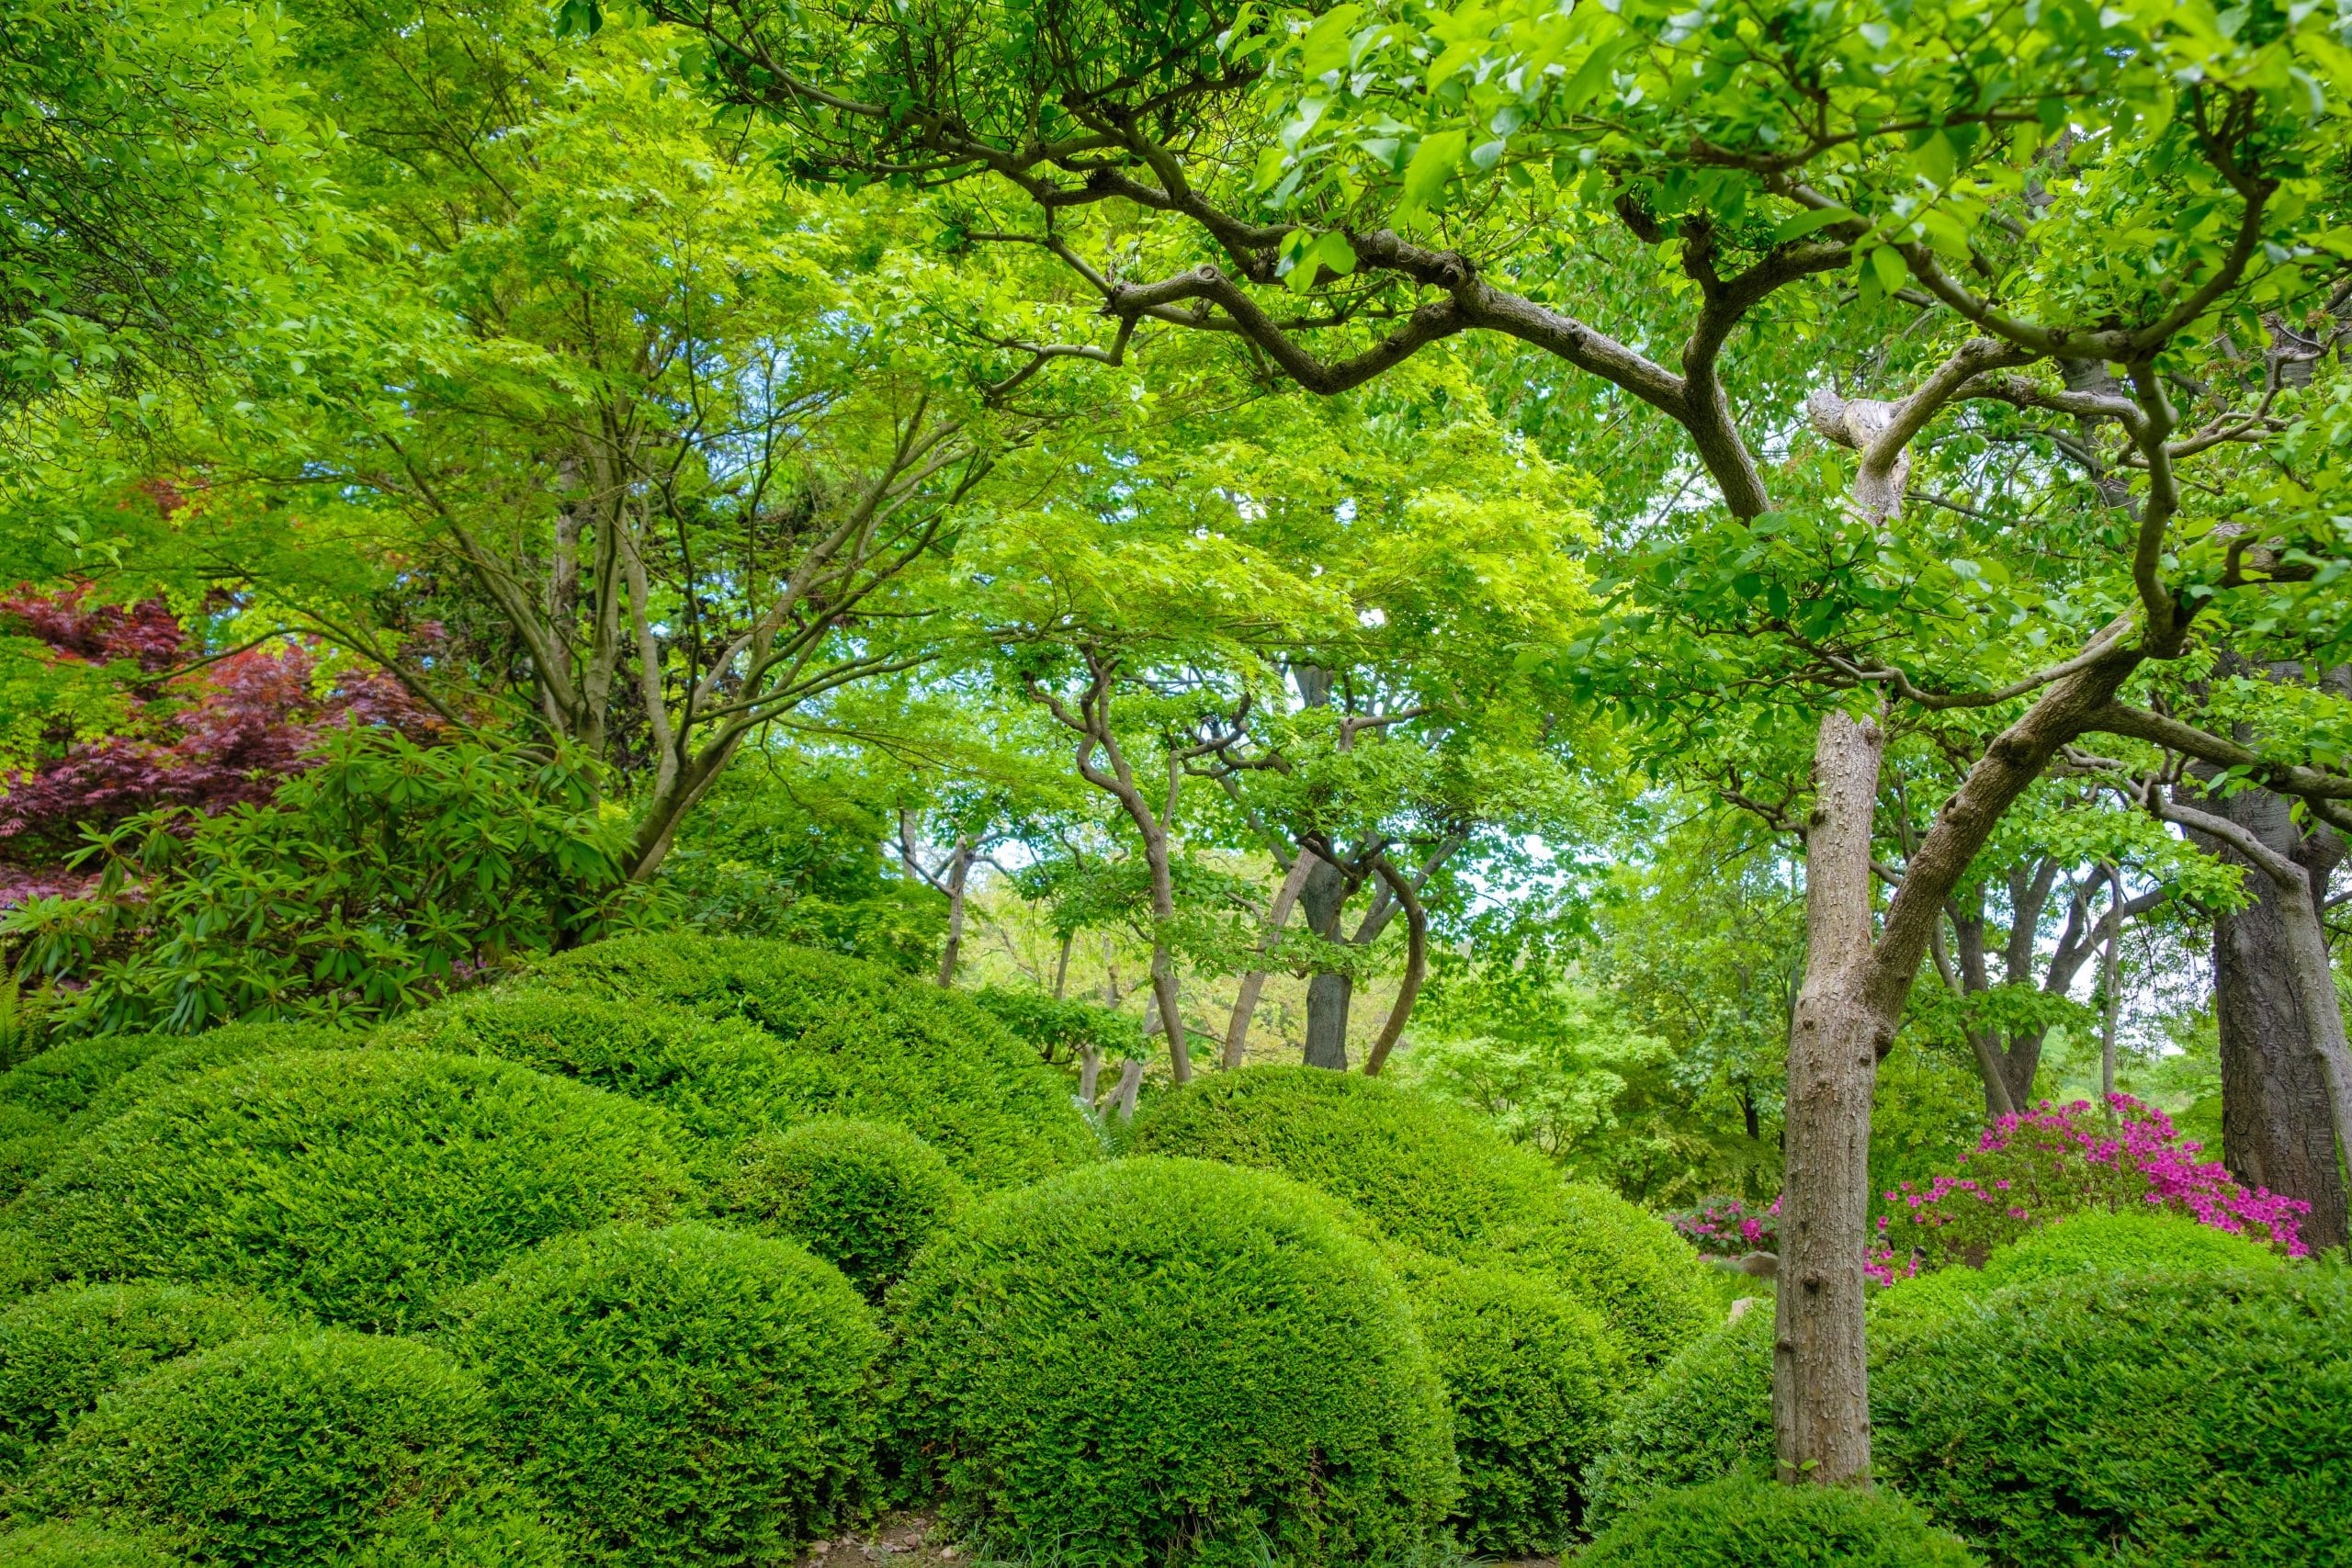 Amazing bright green bushes and trees in the garden in Cranston, RI